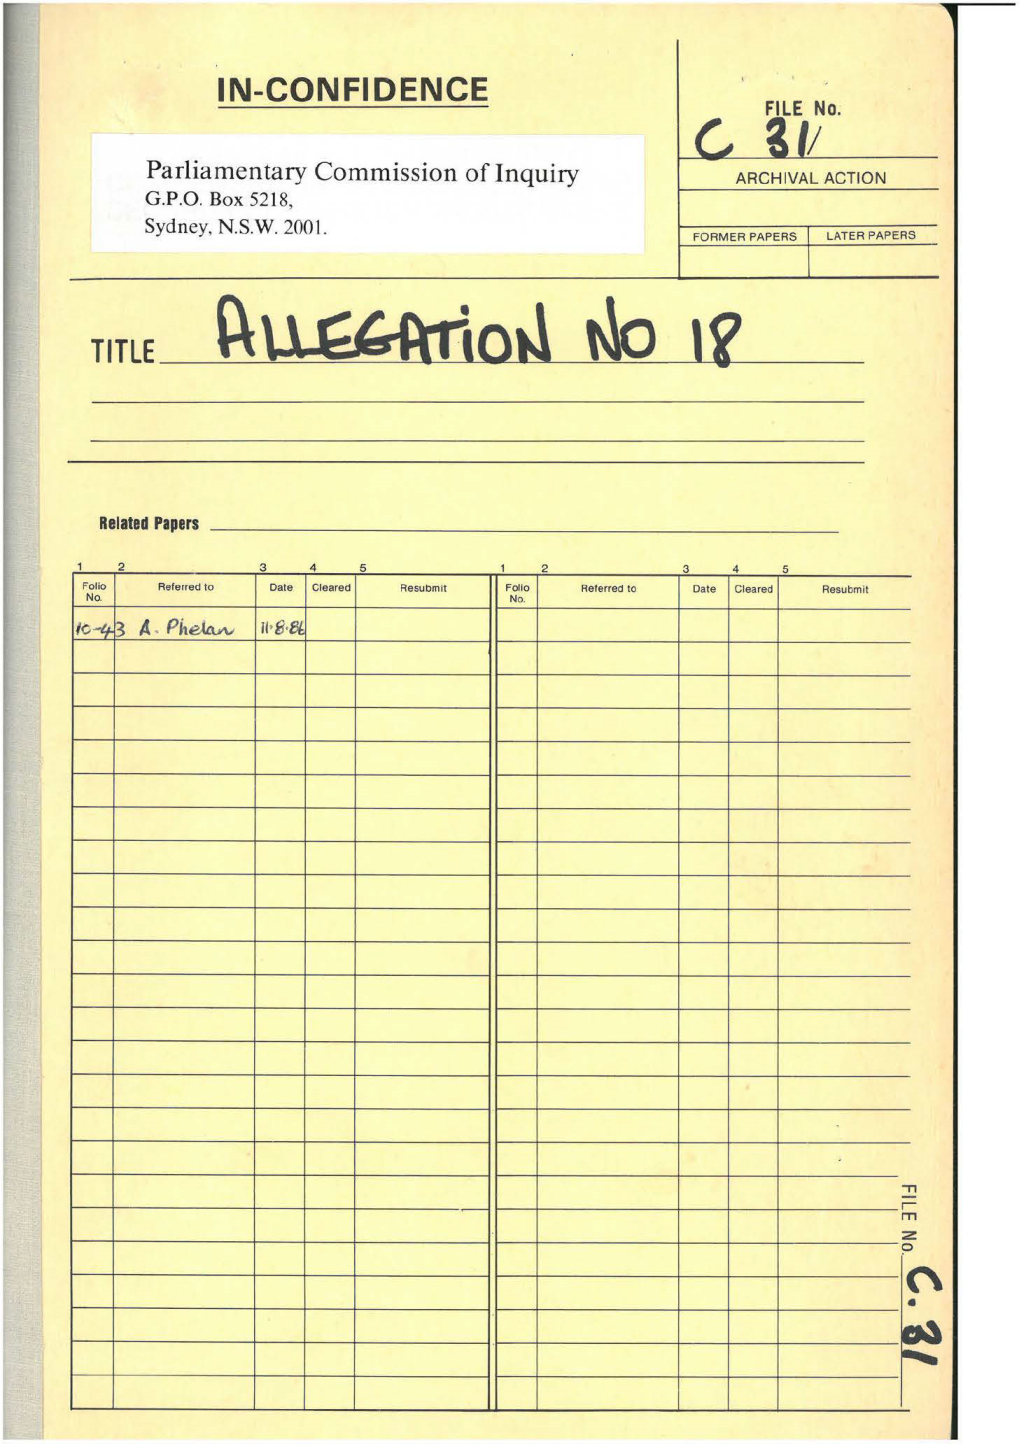 Allegation No. 18 - Appointment of Bill Jegorow